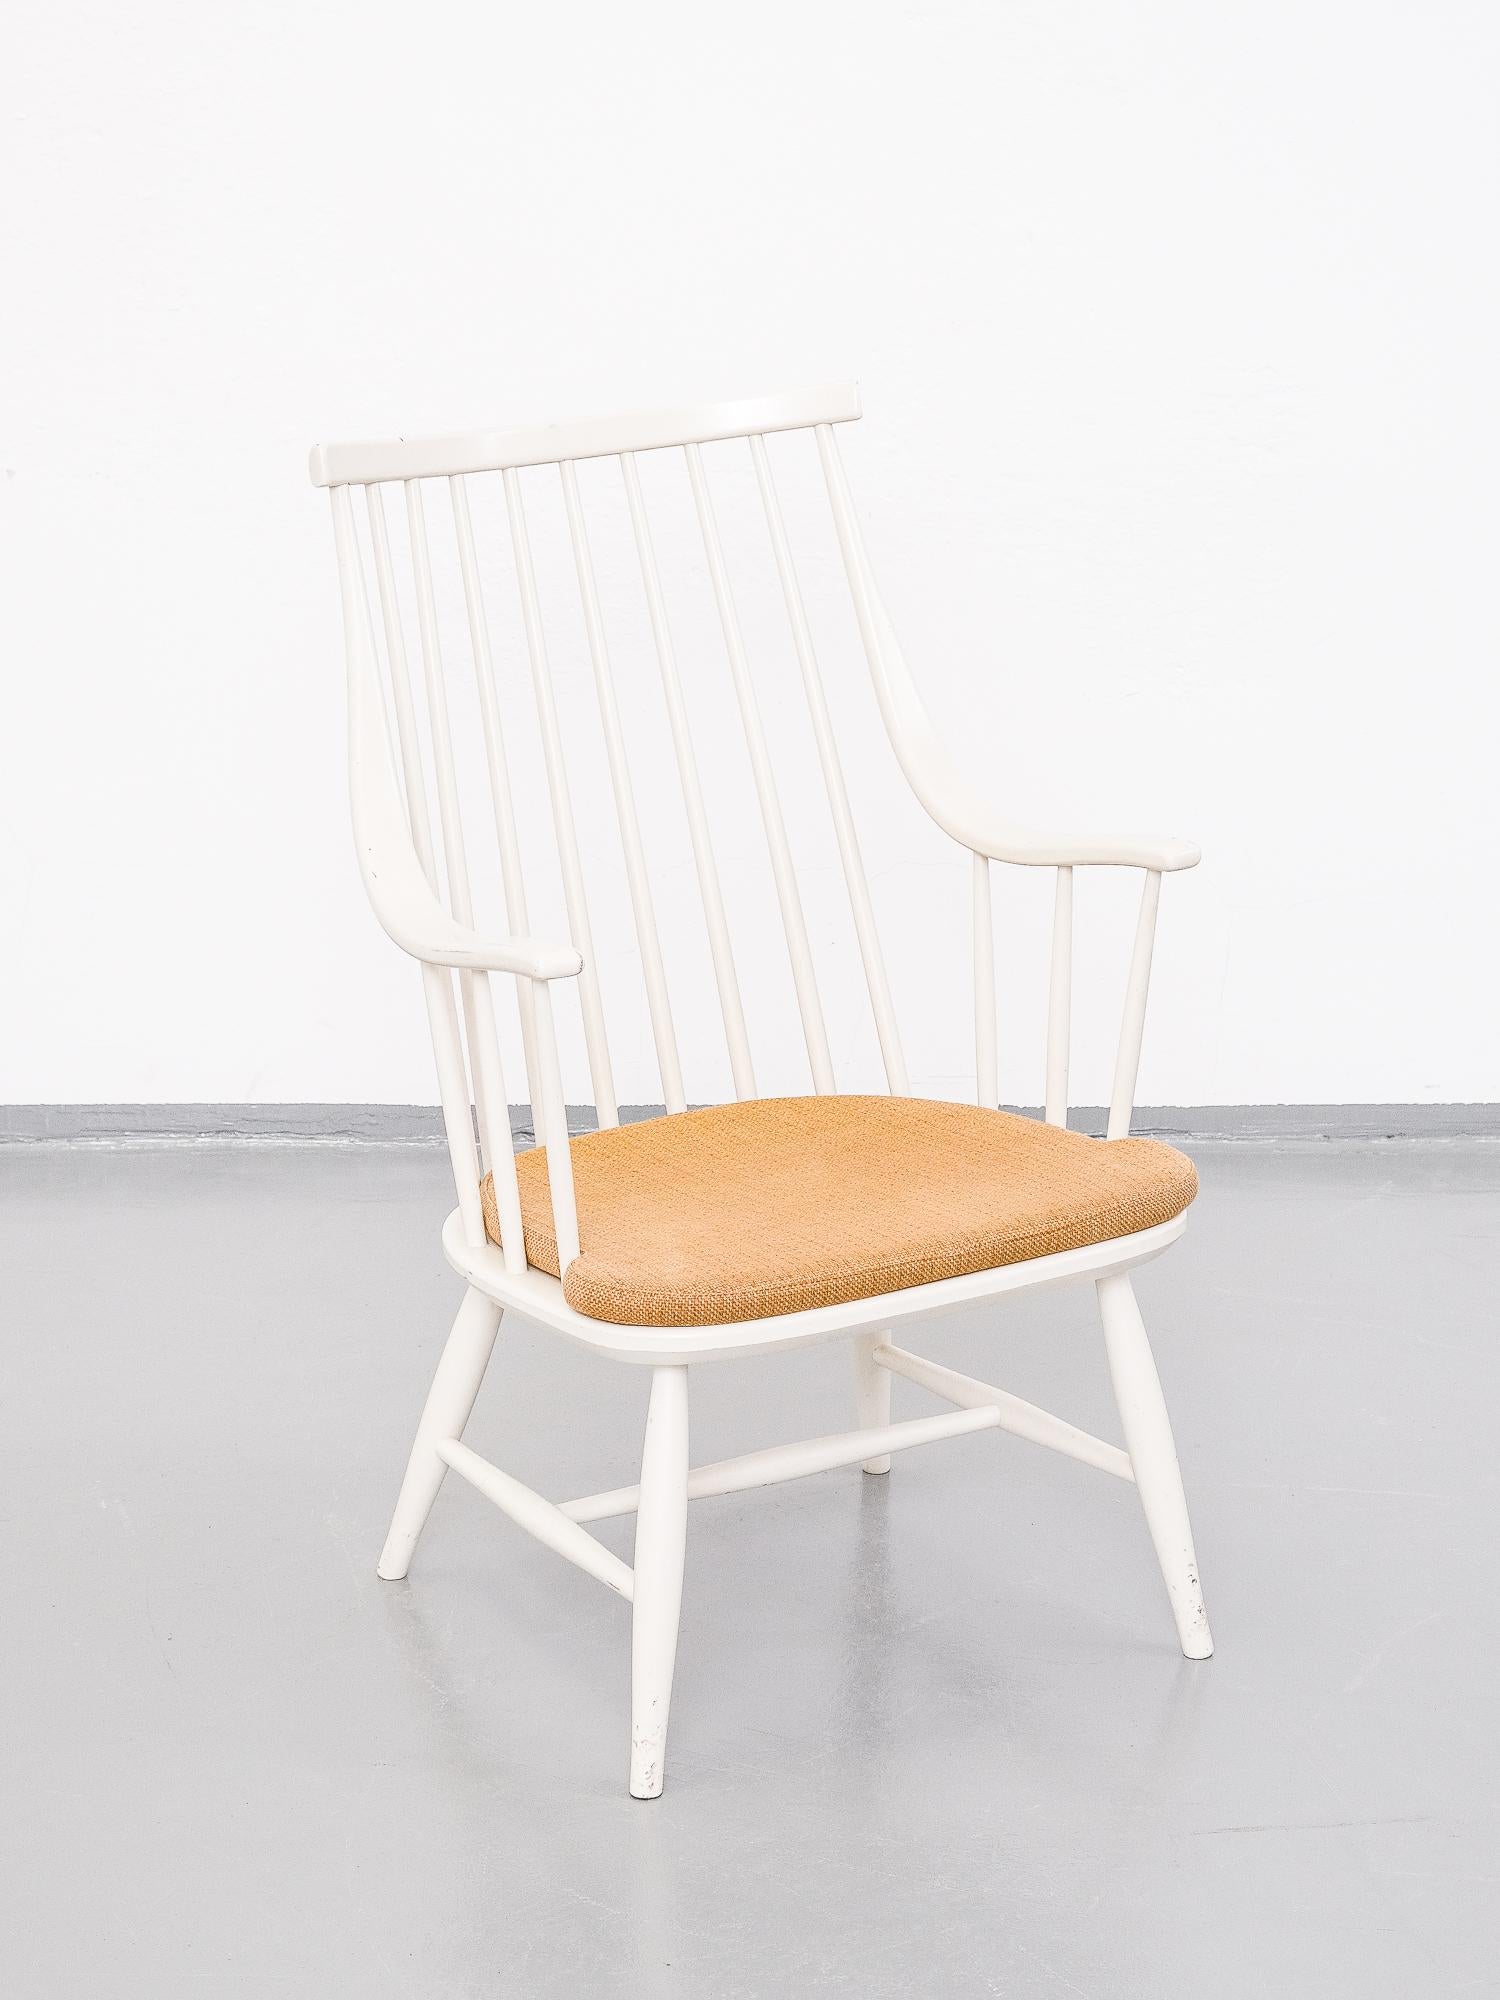 1960s Swedish spindle back easy chair by Lena Larsson for Nesto. Original white paint and cushion with yellow ochre fabric. Good condition, consistent with age and use.